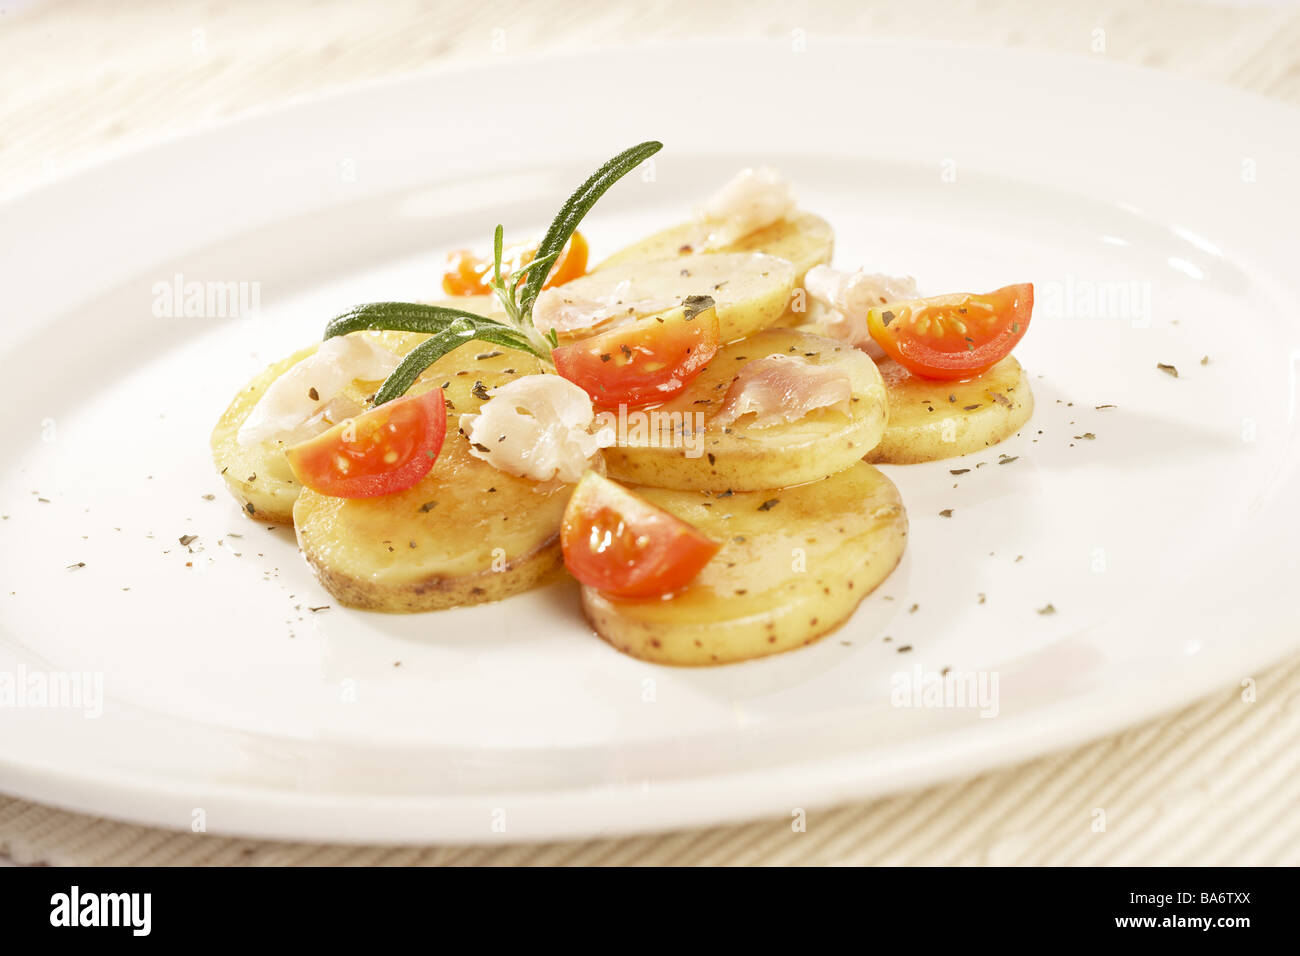 Plates Bratkartoffeln hams prepared cherry-tomatoes rosemary nutrition table Essteller food knows potato-court lunches Stock Photo